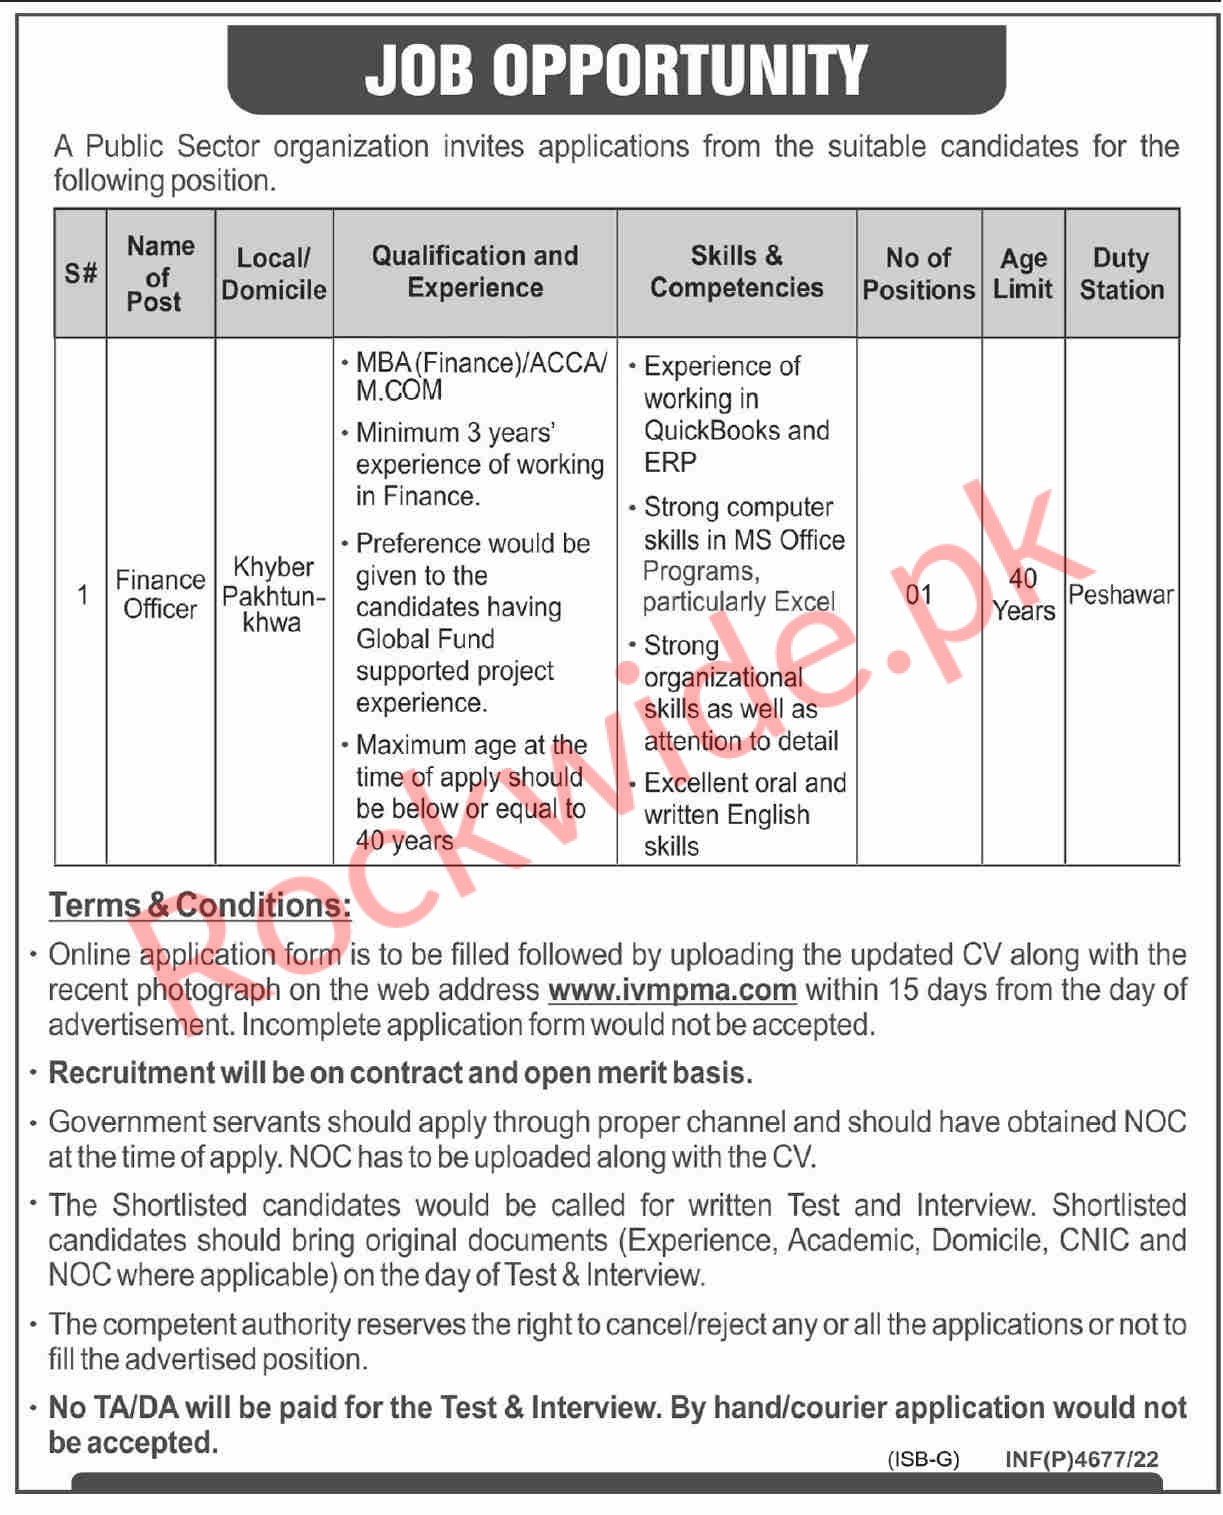 Jobs at a Public Sector Company in Peshawar